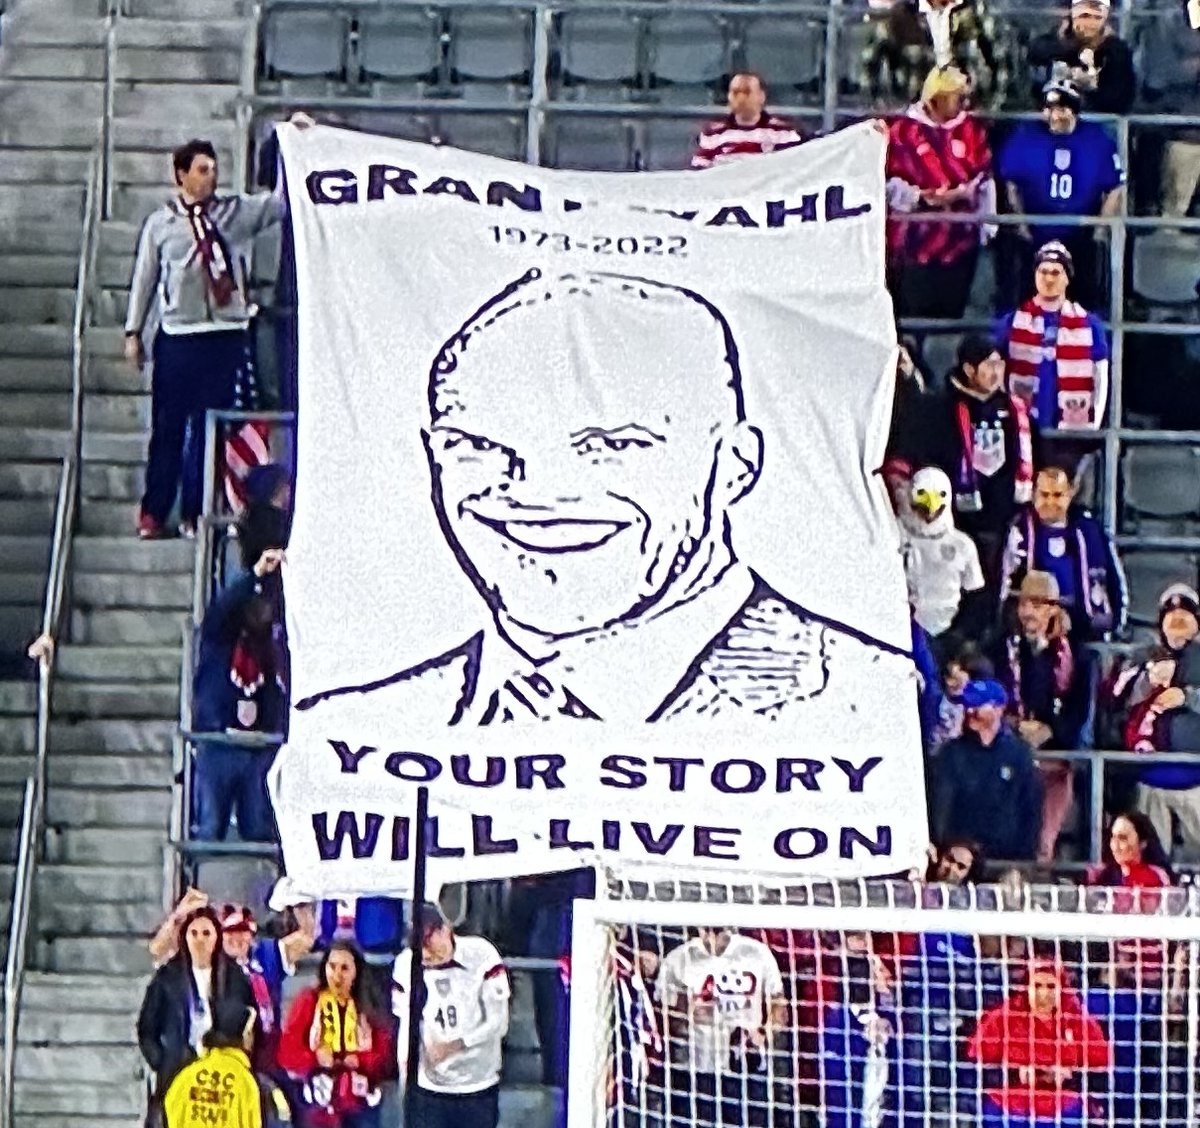 Nice tribute in the stands to Grant Wahl.